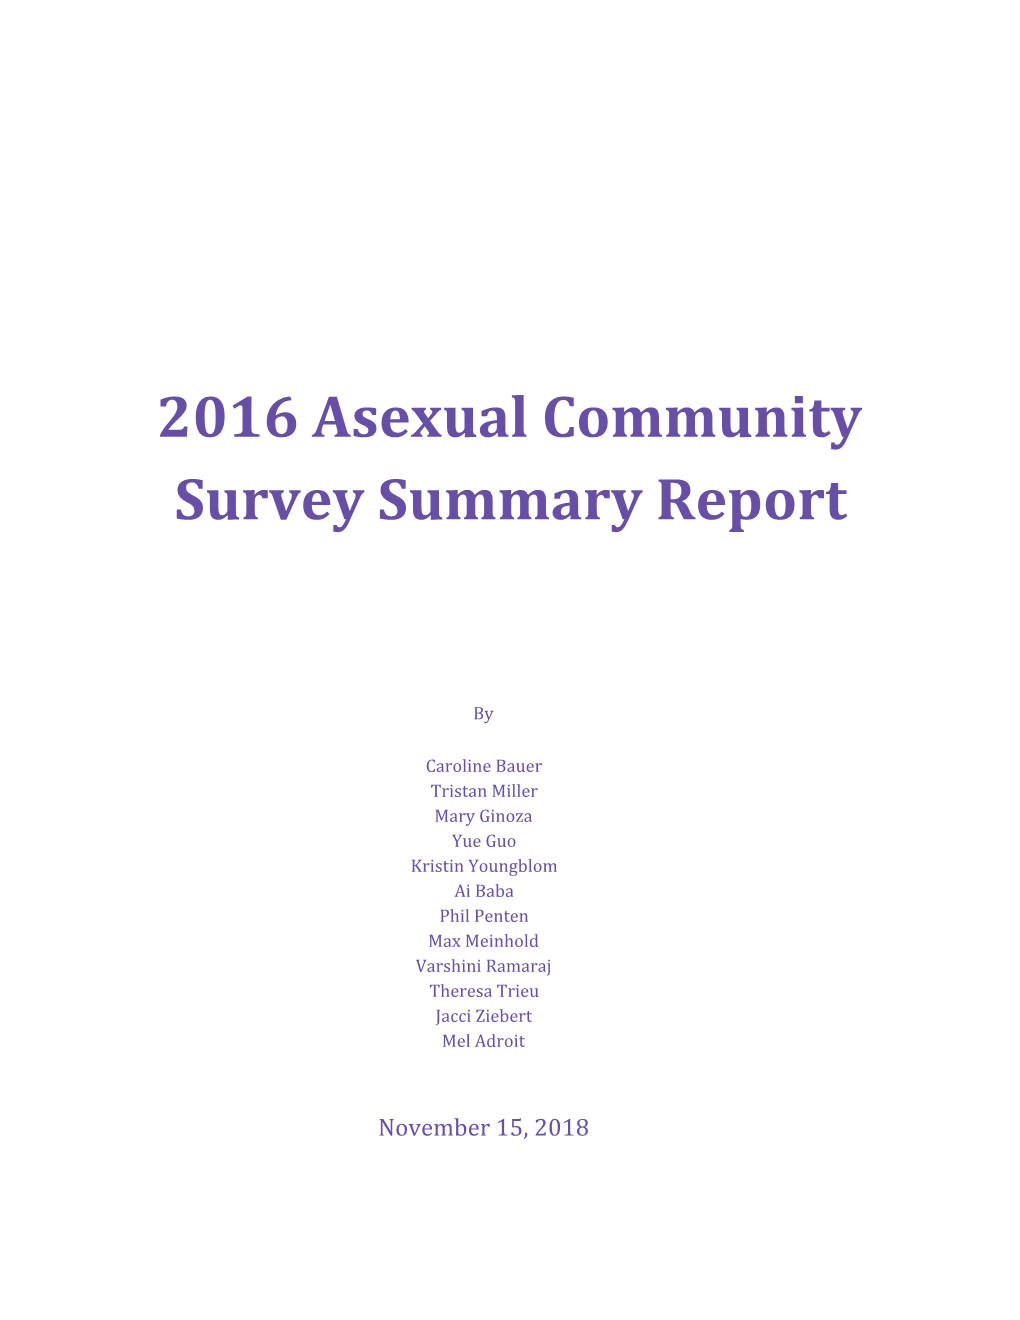 2016 Asexual Community Survey Summary Report